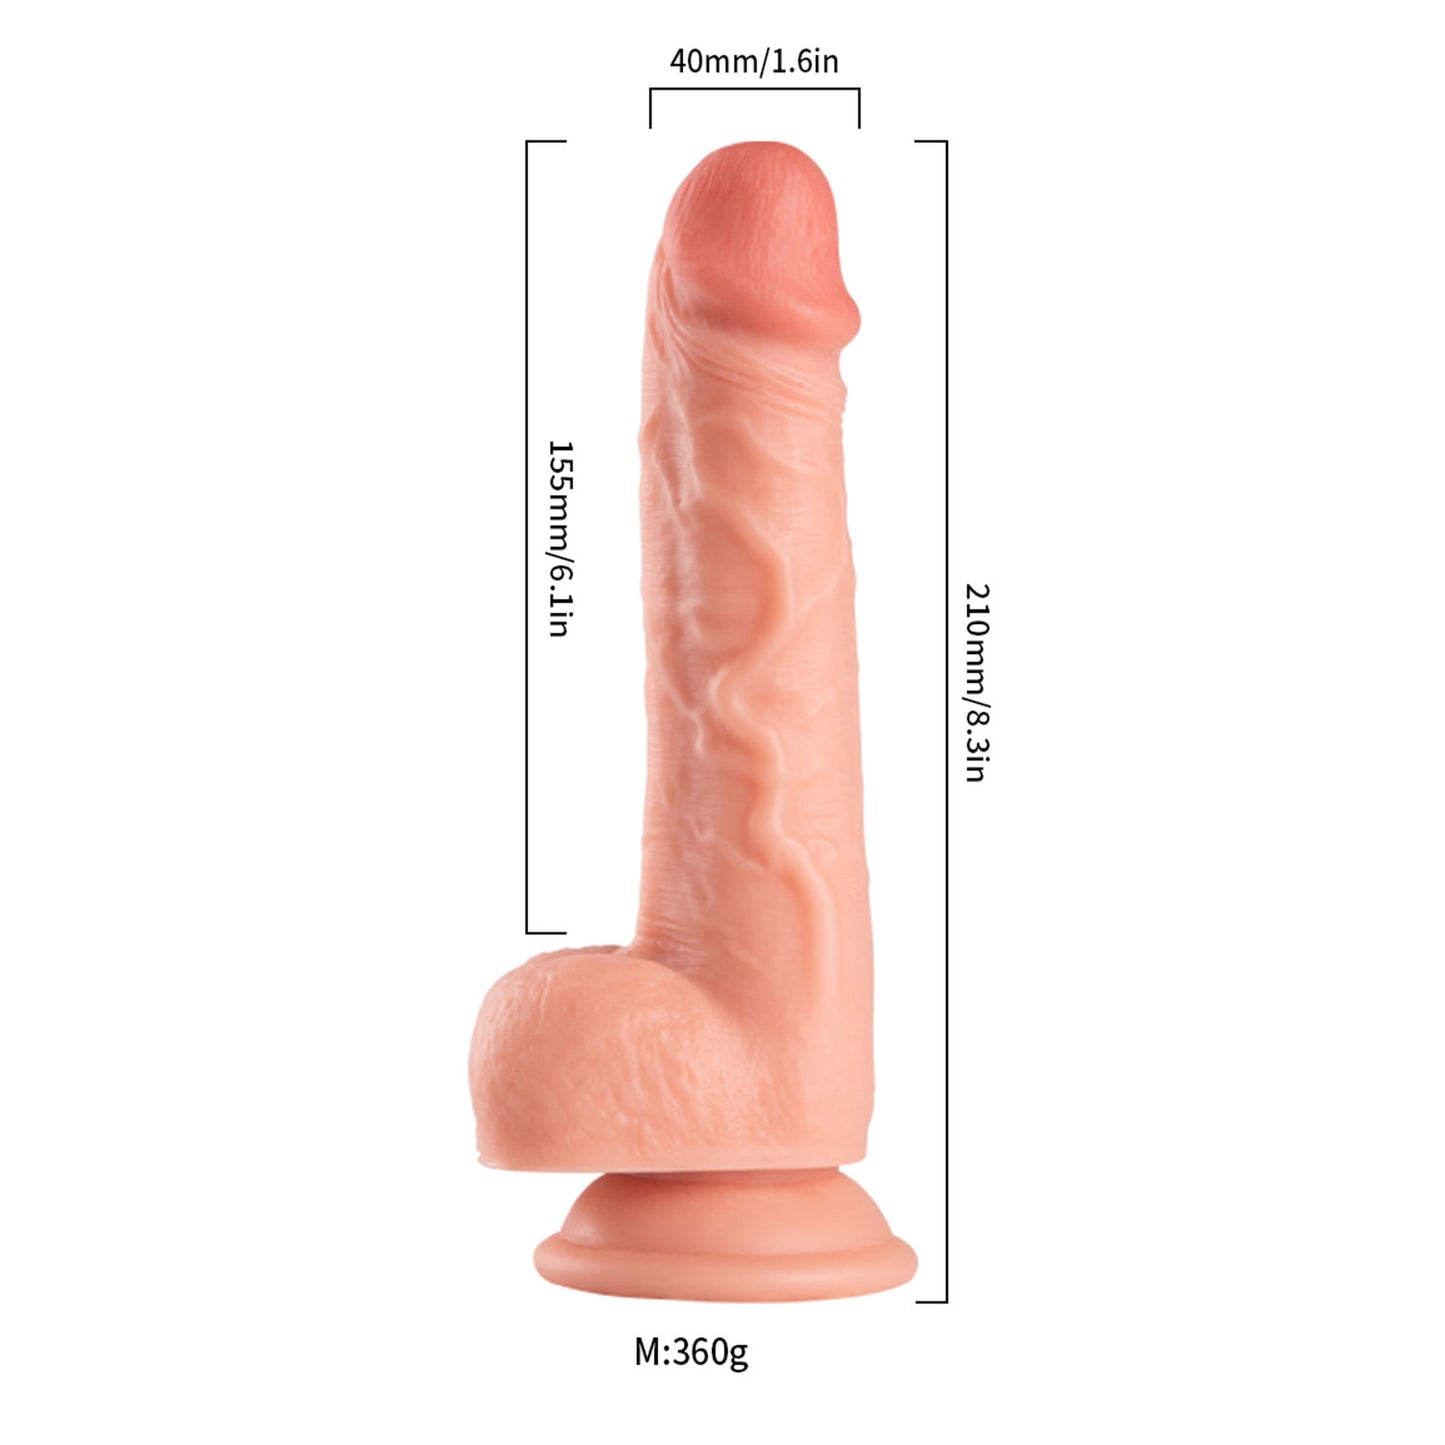 The Horny Company - No Frills Dildo 21cm x 4cm Suction Cup Dong with Balls